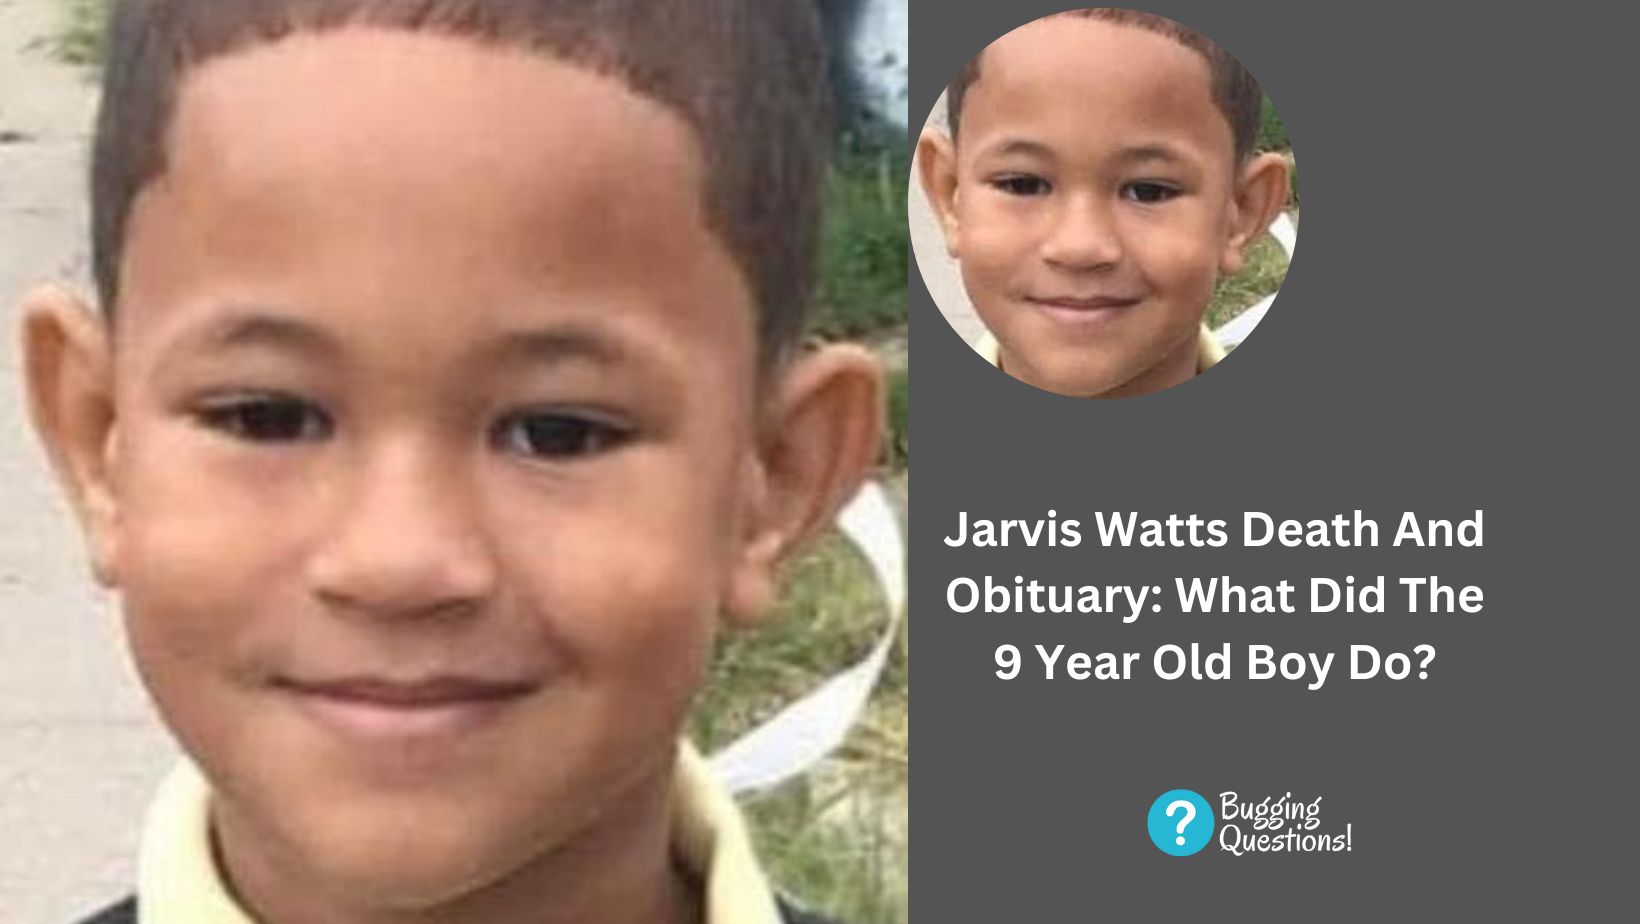 Jarvis Watts Death And Obituary: What Did The 9 Year Old Boy Do?